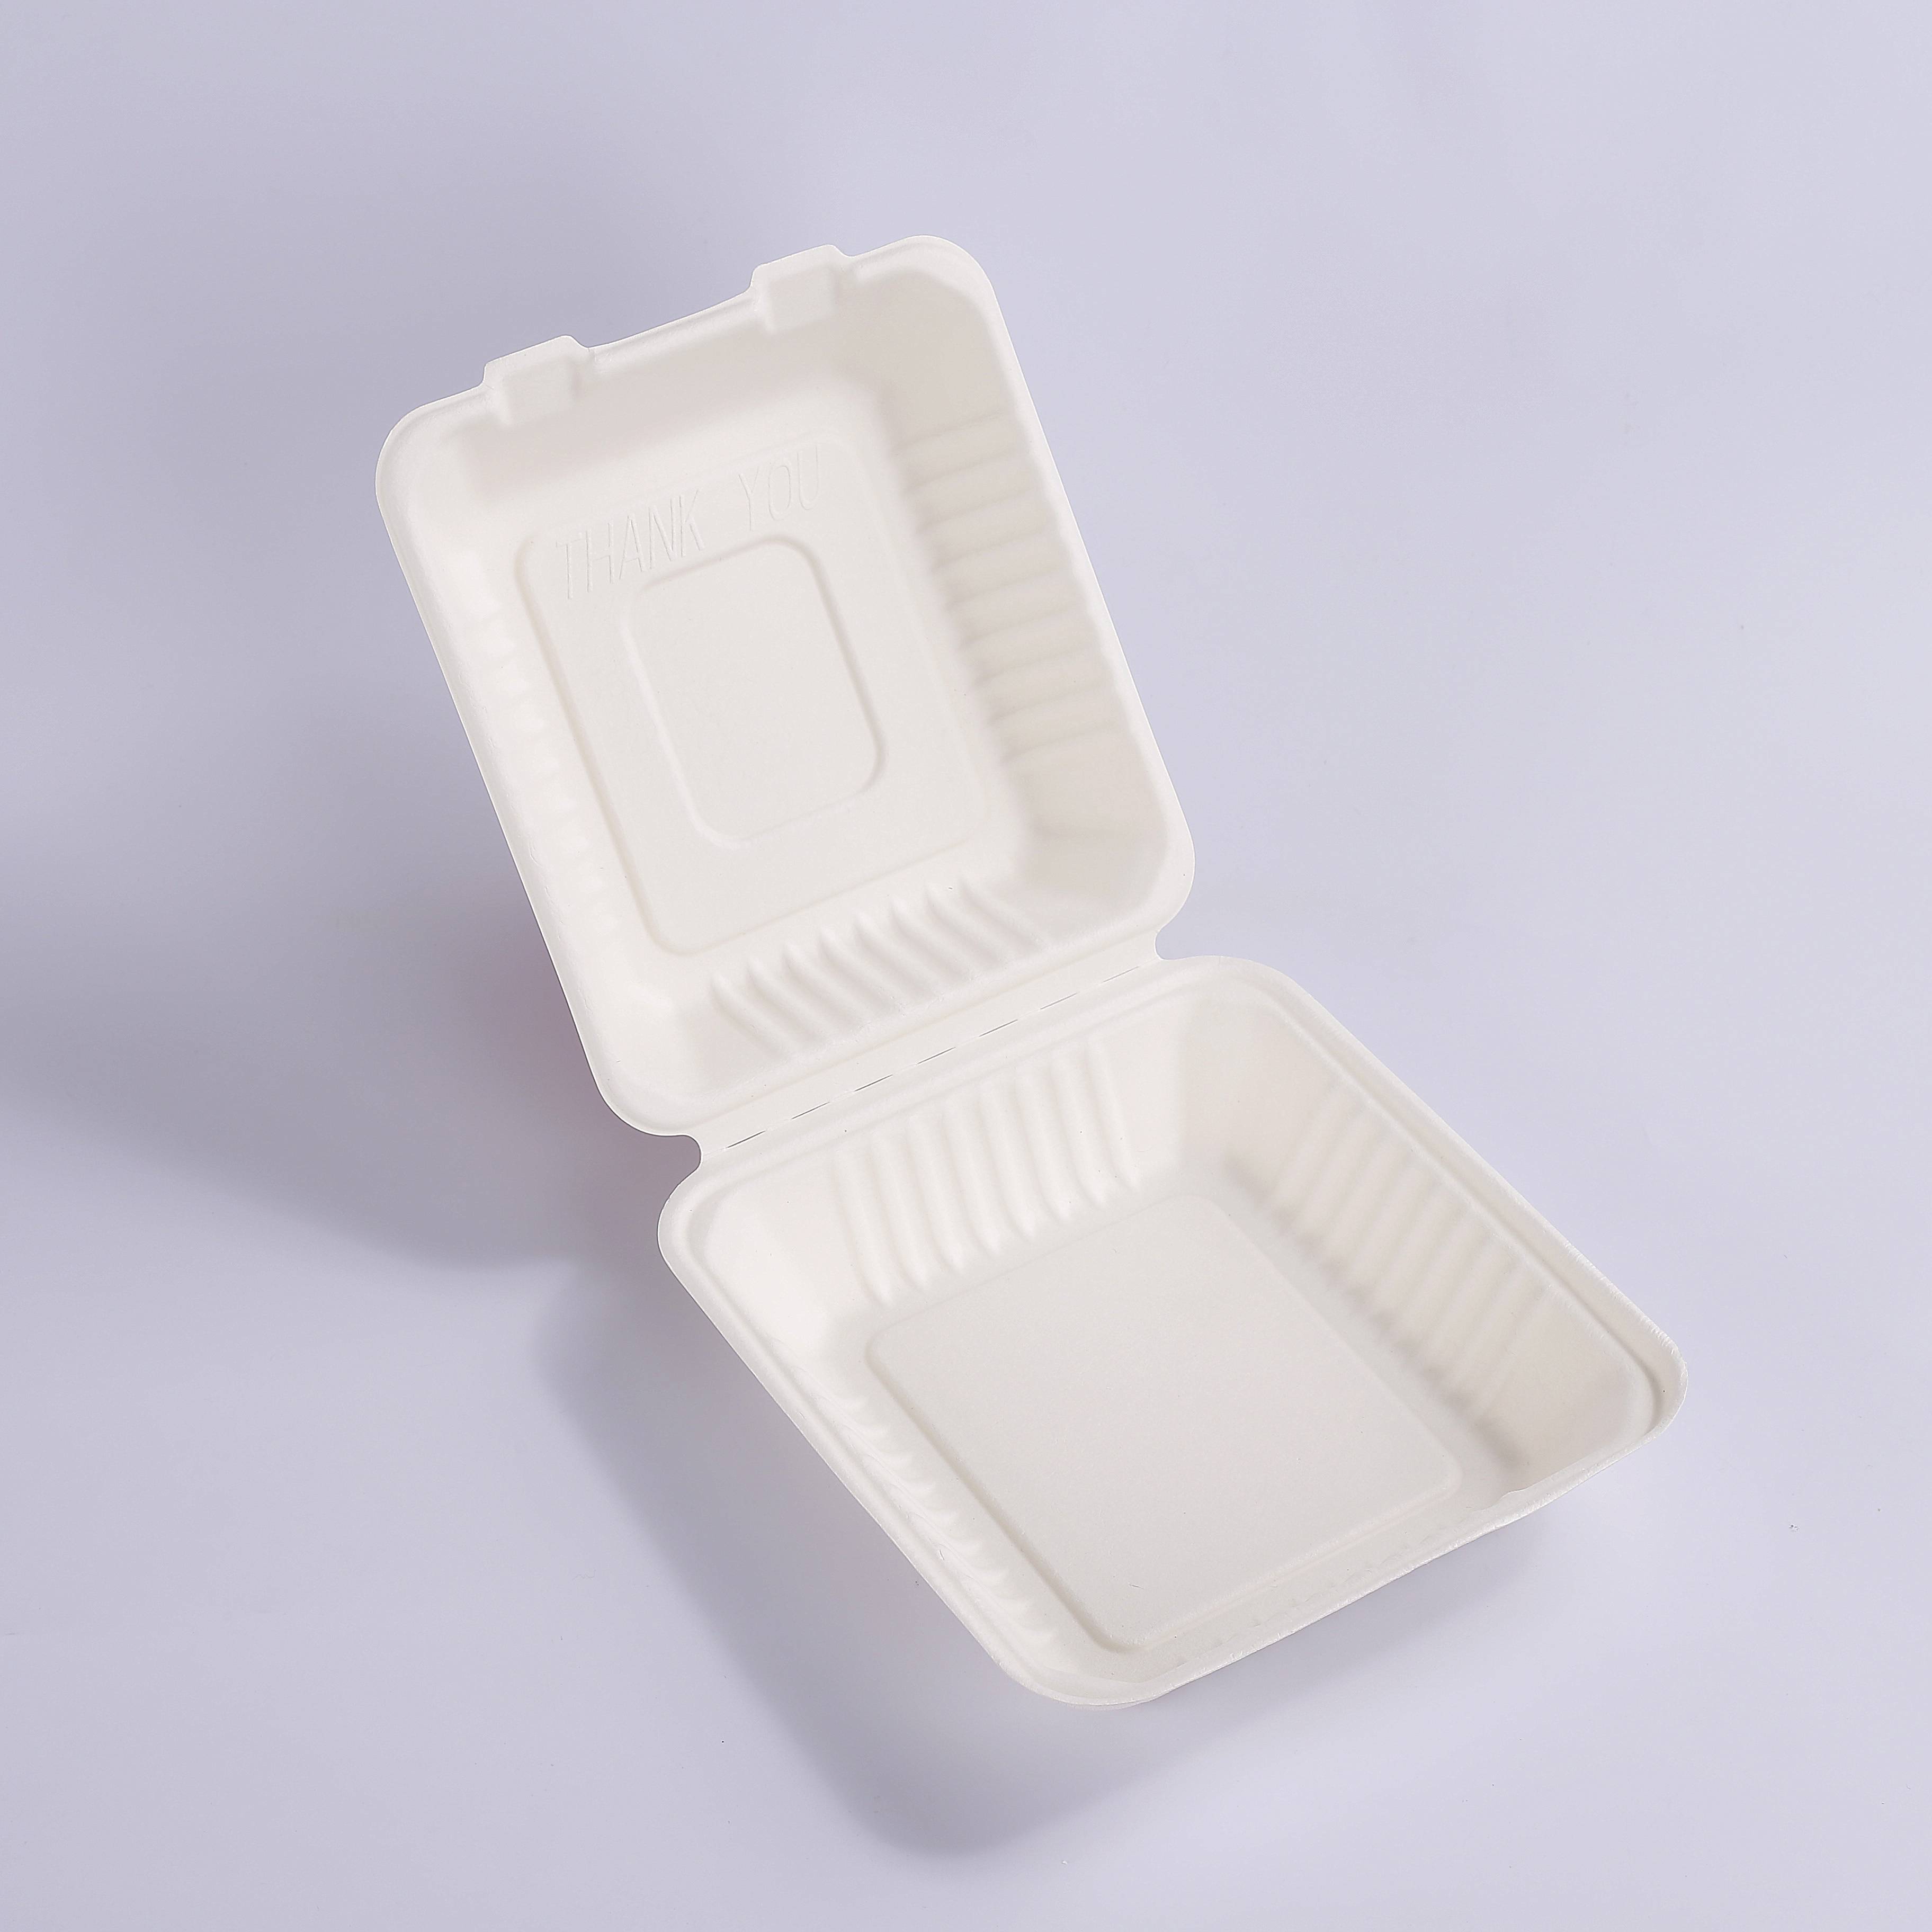 Factory selling Sugarcane Take Out Box - Bagasse 8*8″ Shallow Clamshell Takeout Containers, Biodegradable Eco Friendly Take Out to Go Food Containers with Lids for Lunch Leftover Meal Prep S...